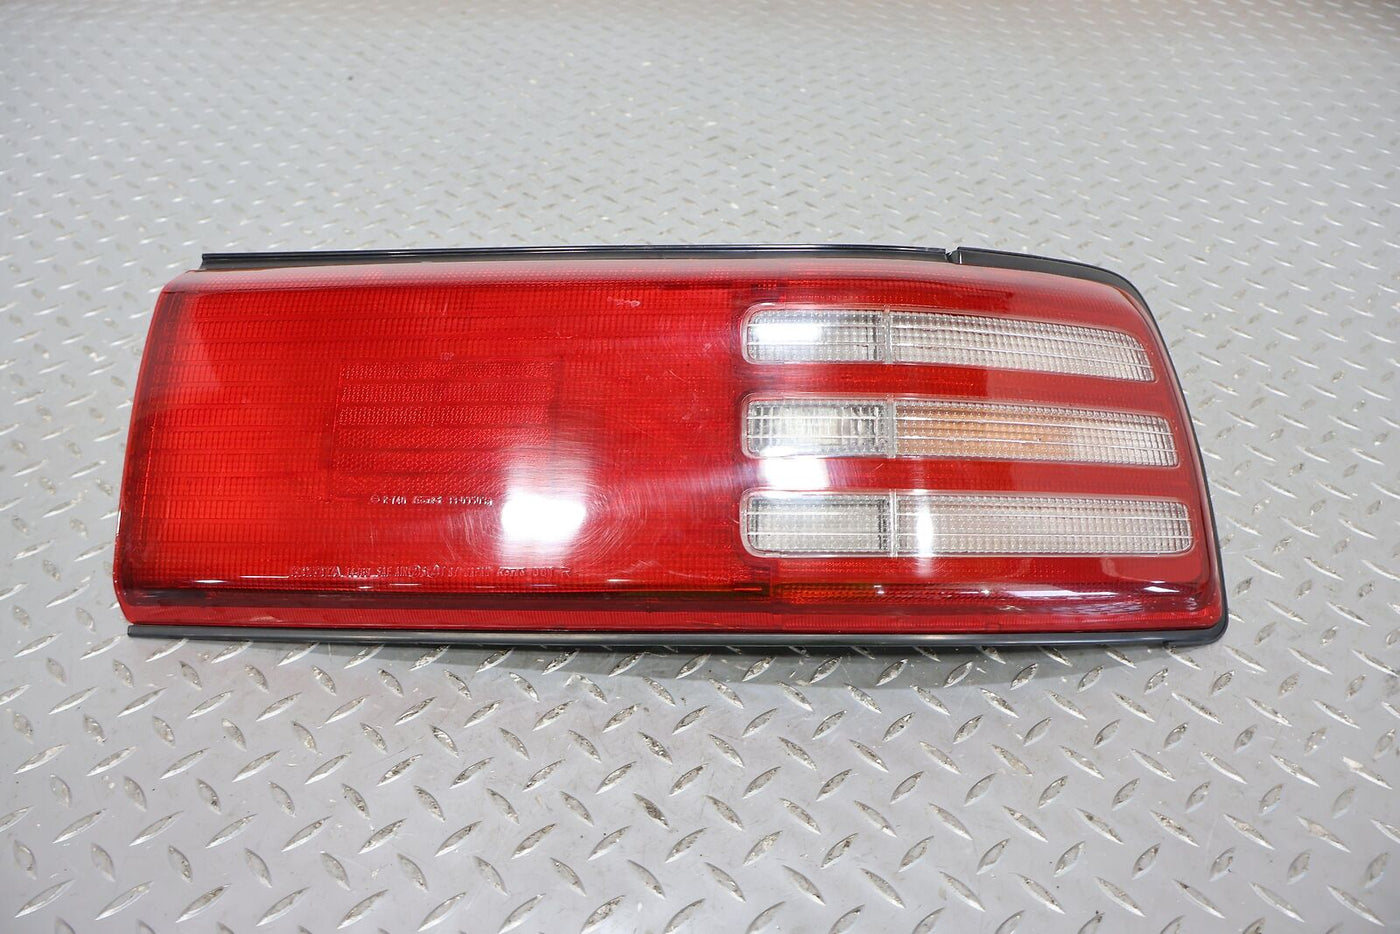 89-93 Toyota Supra MK3 Rear Right Tail Light Lamp (Some Cracking) See Notes